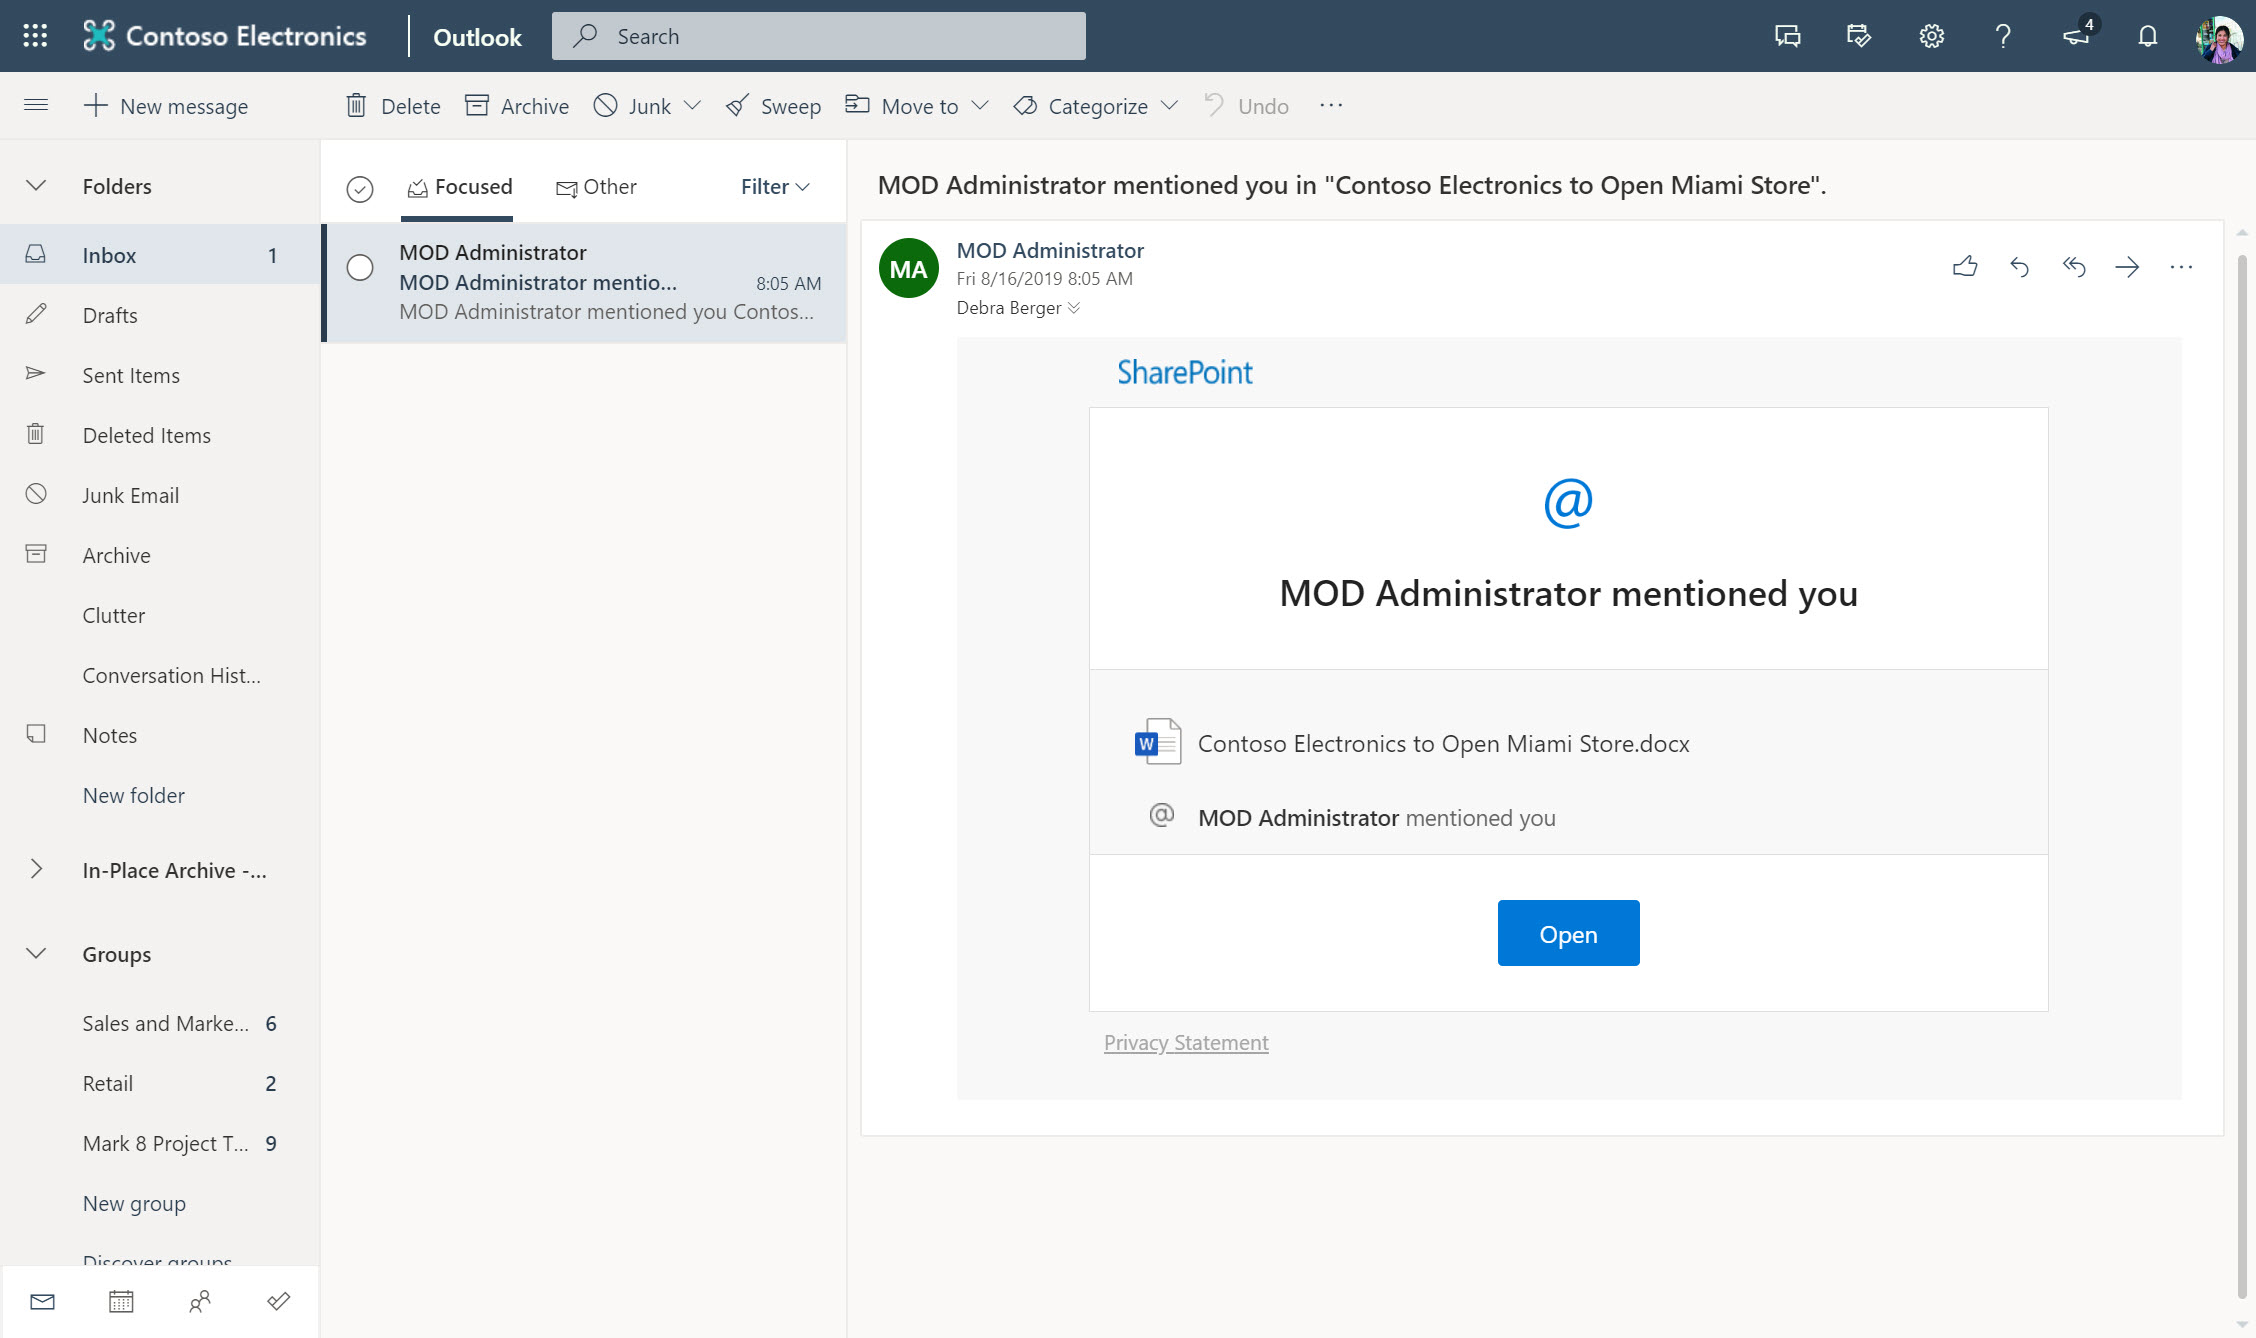 Comments with a @mention sends an email directly to that colleagues inbox.